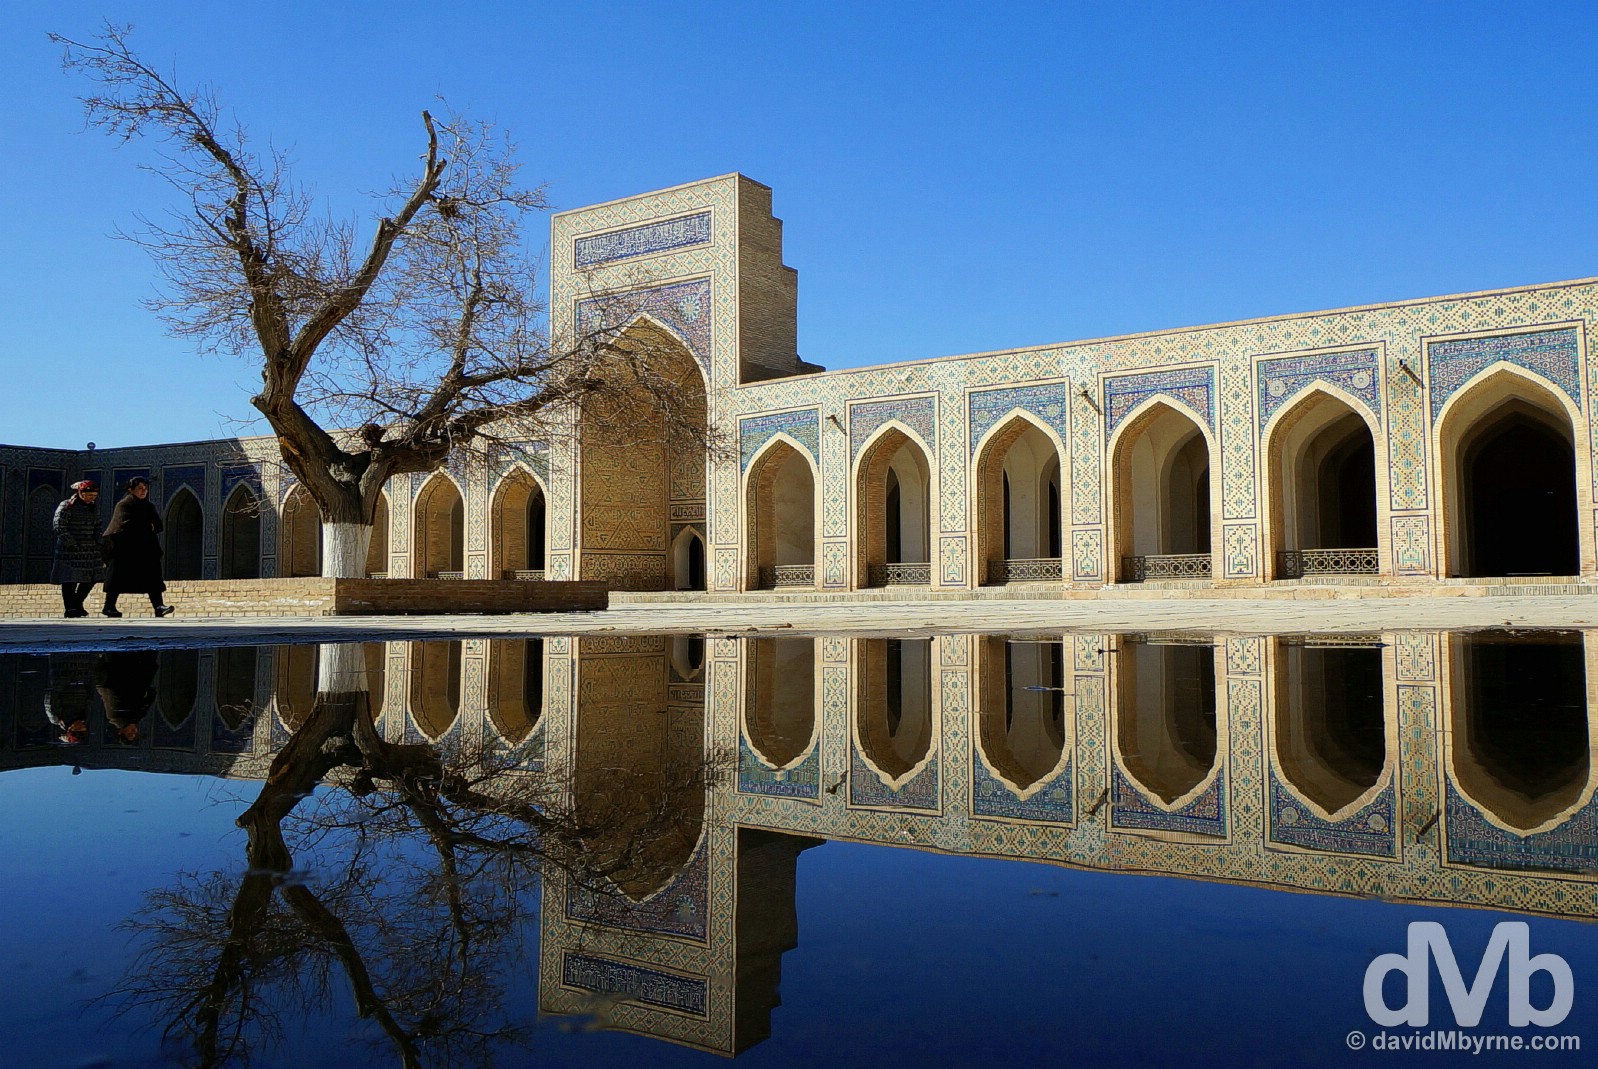 Reflections in the main courtyard of the Kalon Mosque in Bukhara, Uzbekistan. March 12, 2015.